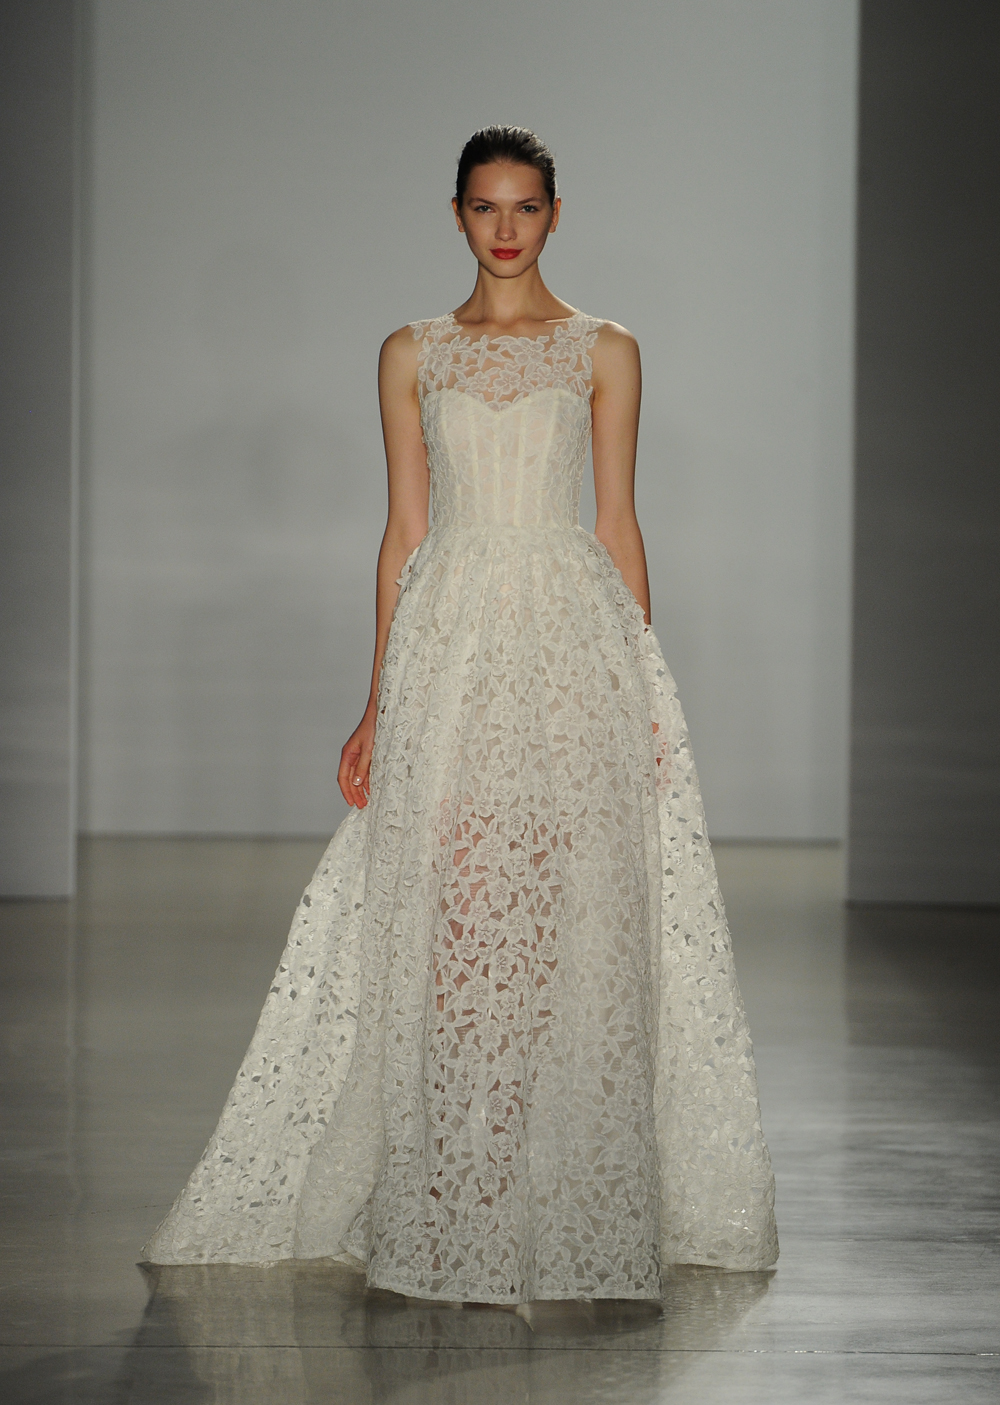 New Amsale Wedding Dresses For Fall 2016 Are Modern And Romantic ...